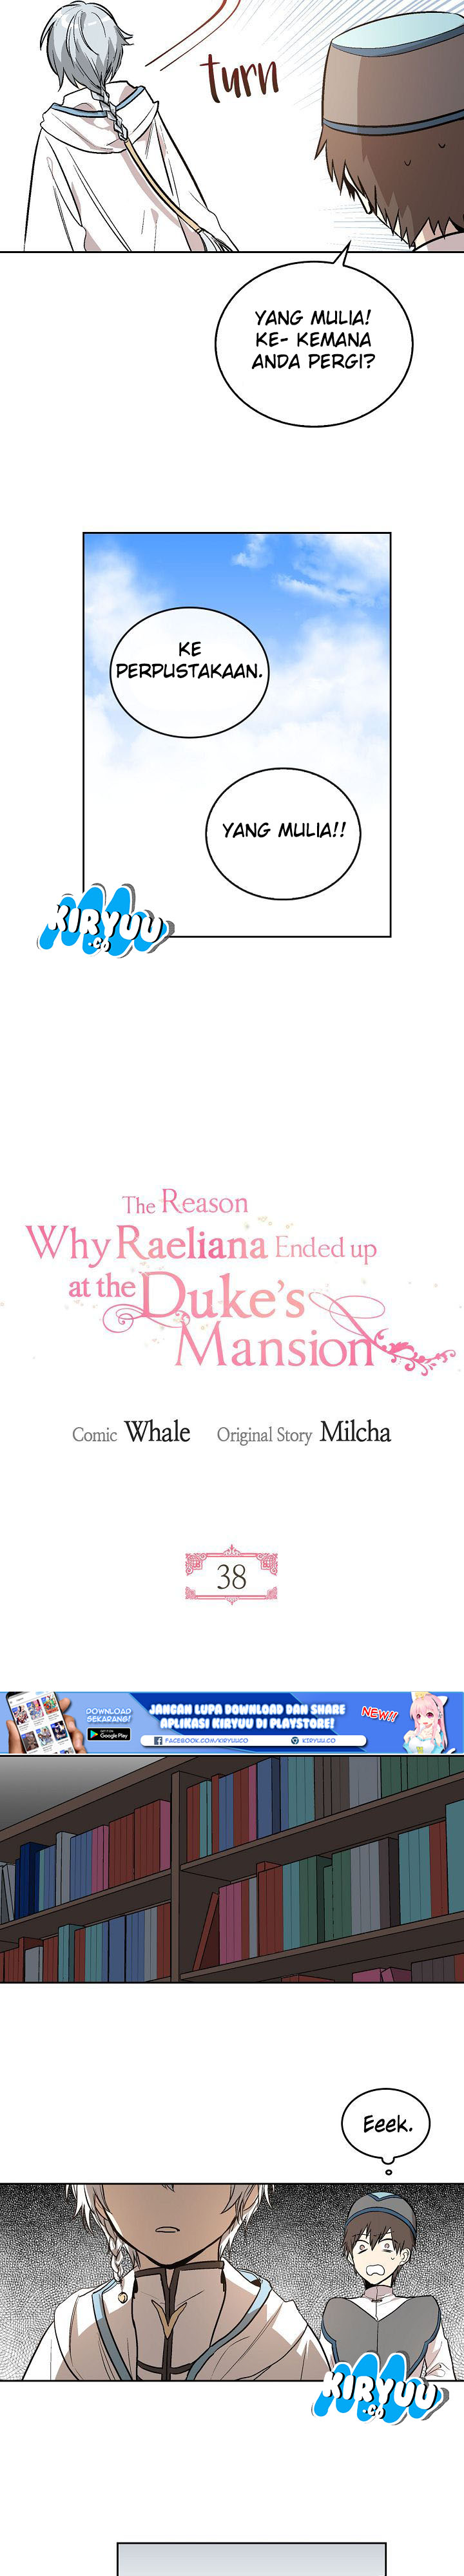 The Reason Why Raeliana Ended up at the Duke’s Mansion Chapter 38